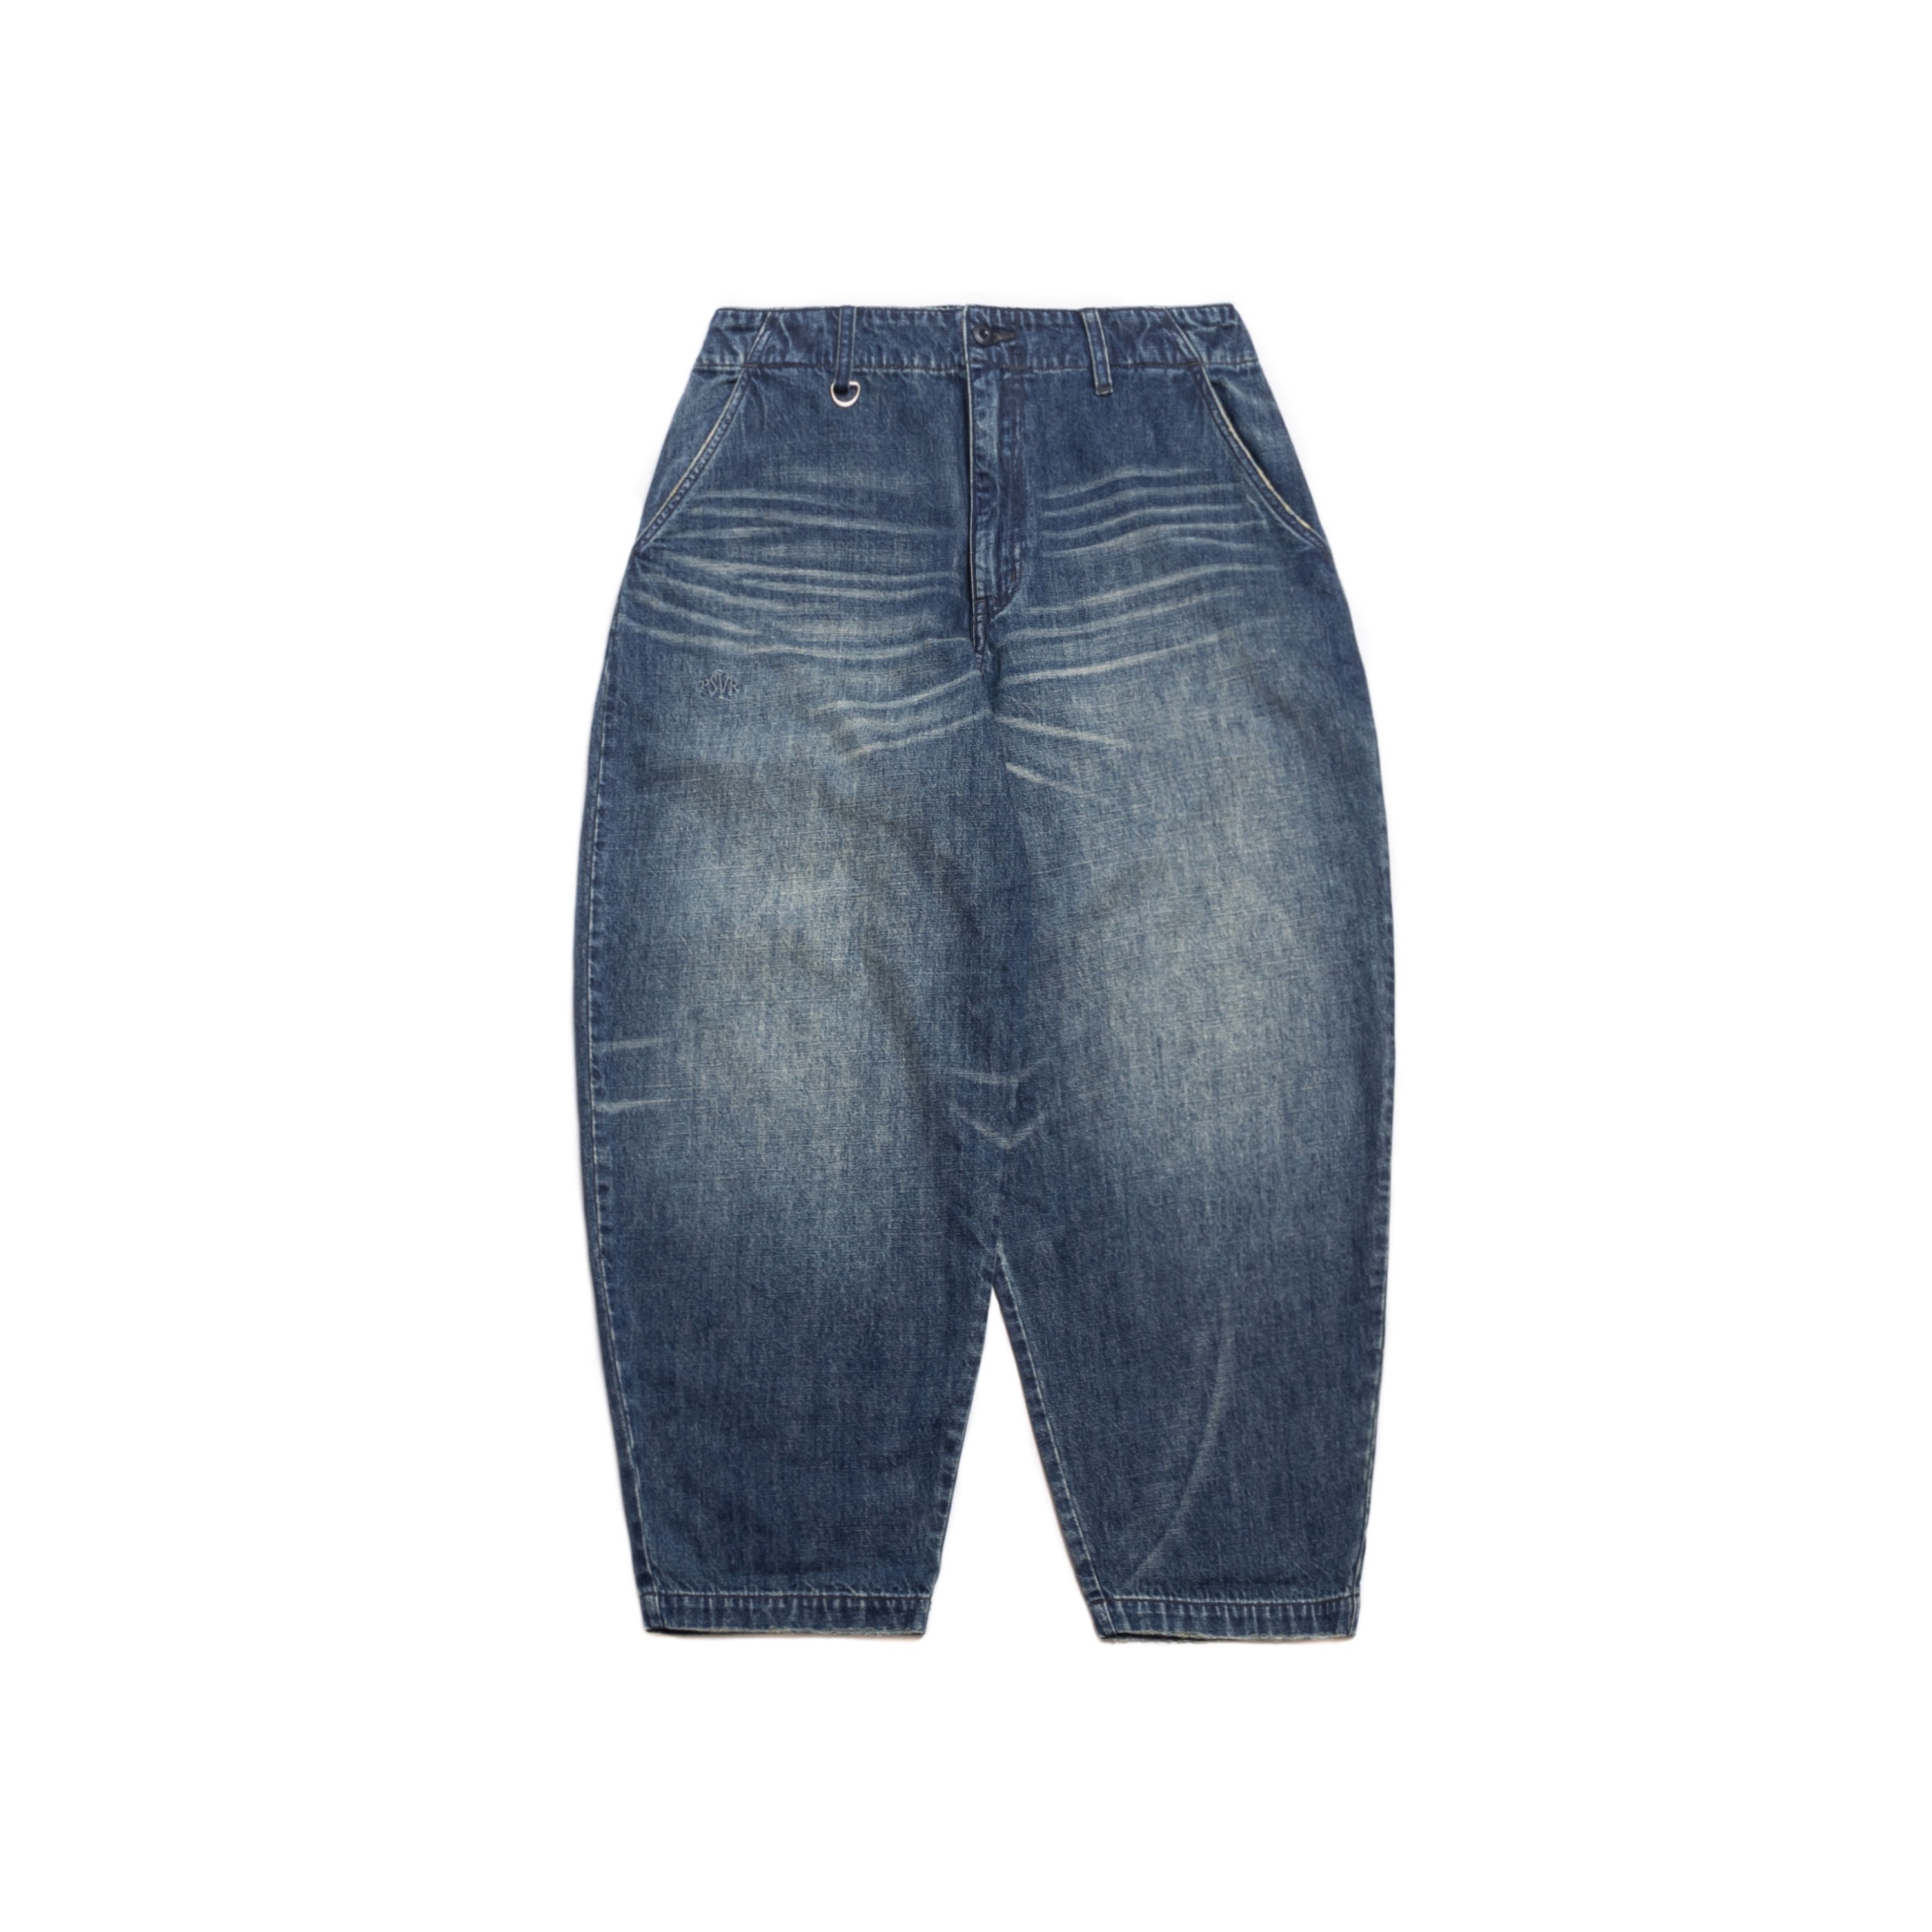 PERSEVERE ENZYME-STONEWASHED HIGE JEANS - WASHED BLUE